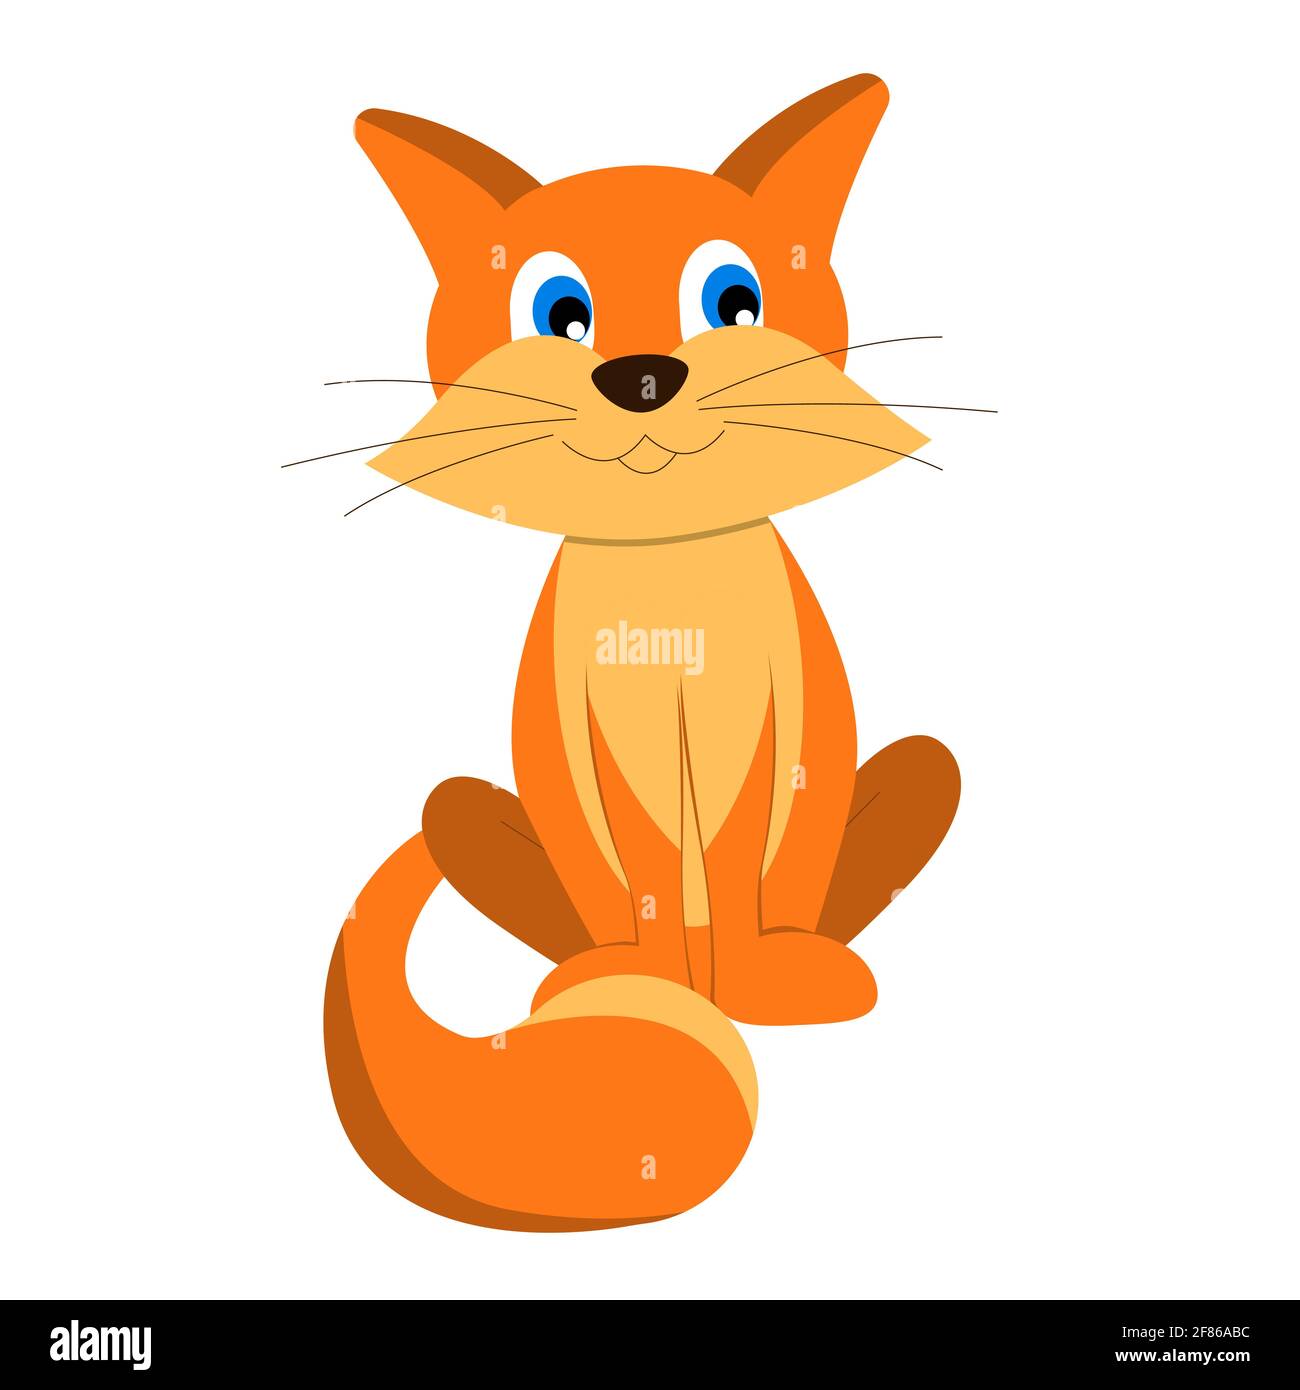 illustration of a funny red kitten sitting smiling, Vector isolated on a white background. Stock Vector